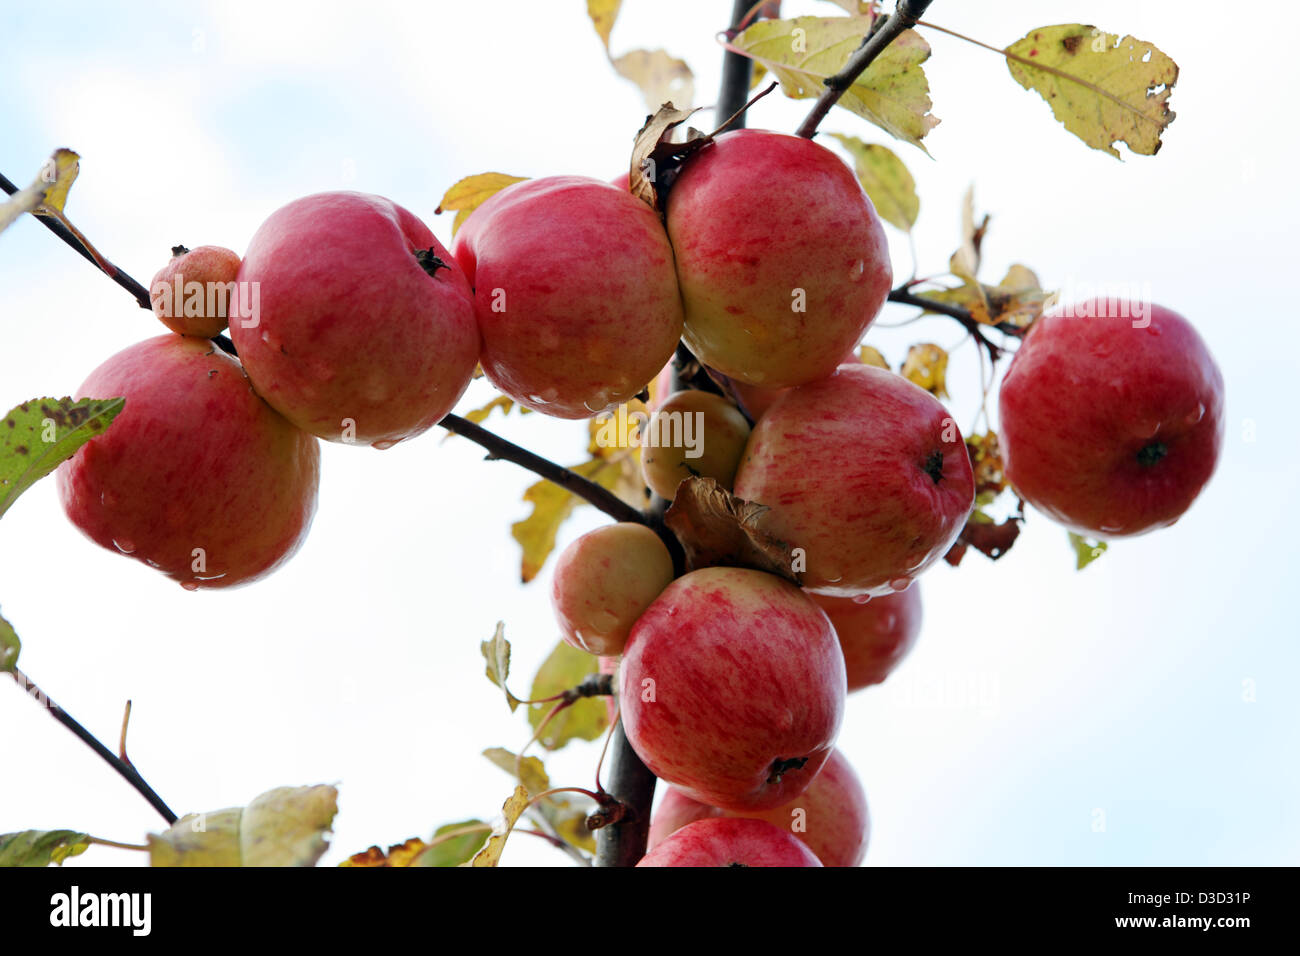 Resplendent village, Germany, apples hanging from a tree branch Stock Photo